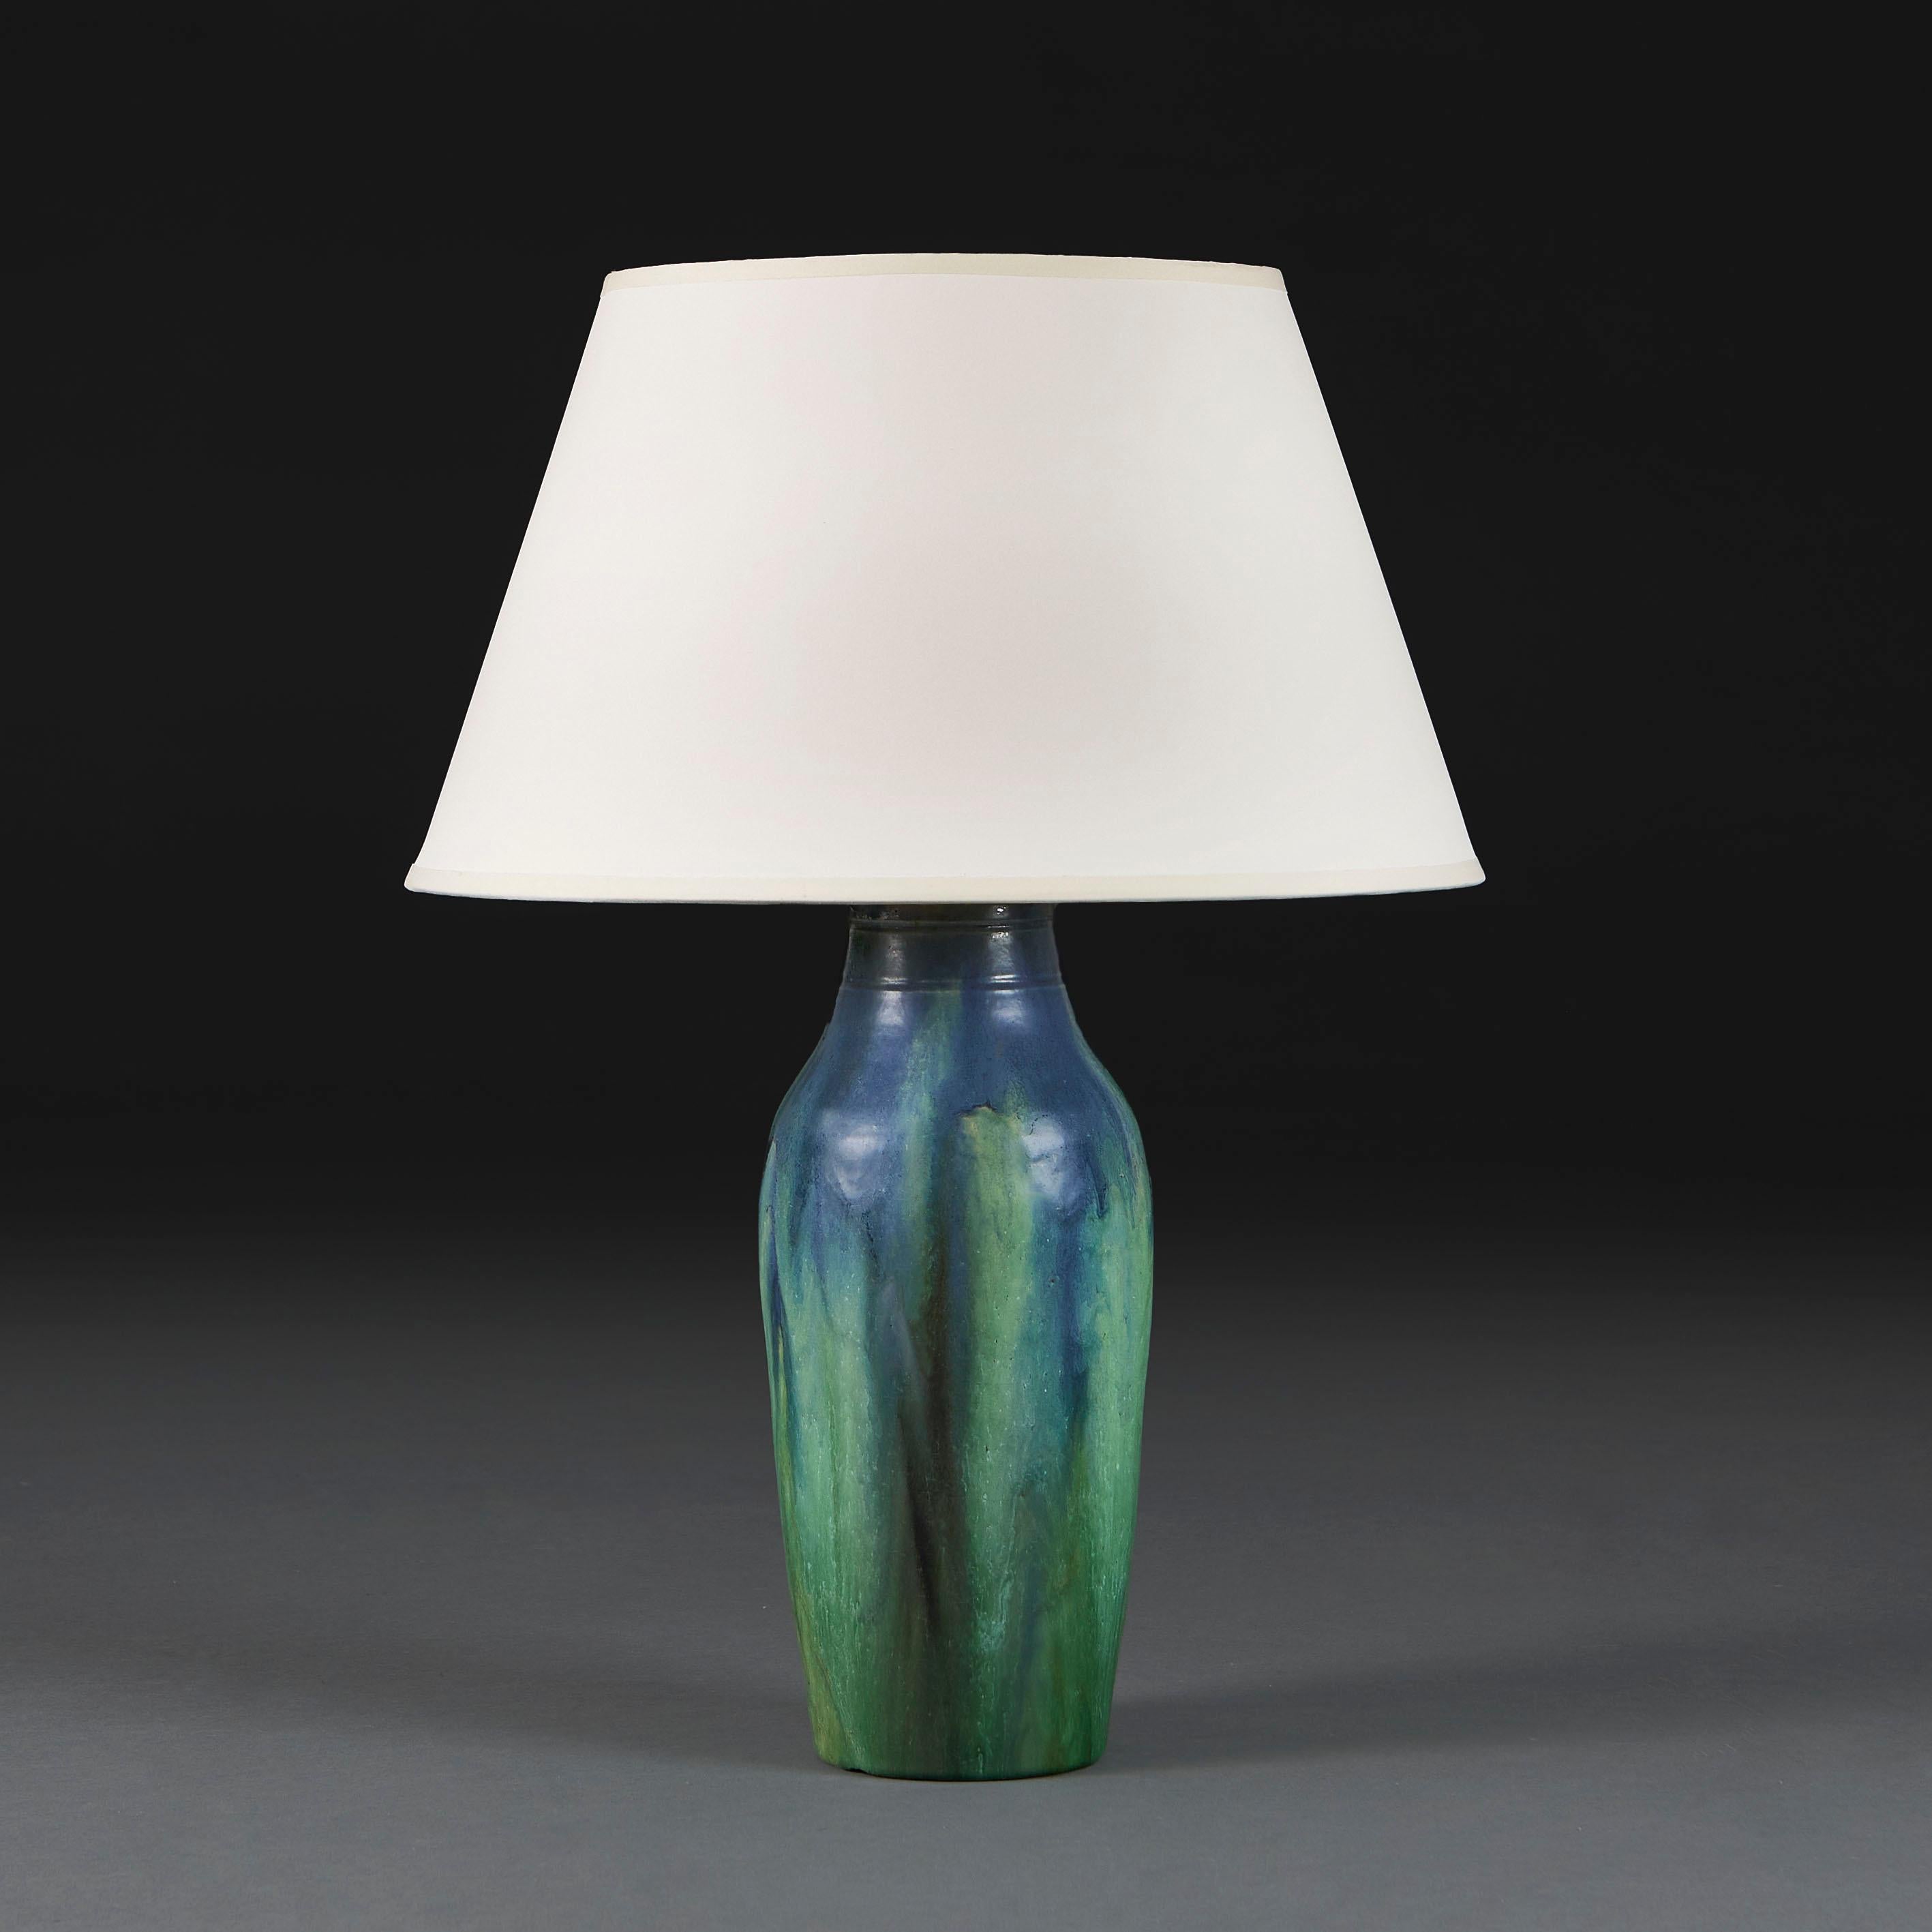 France, circa 1940

A mid-century art pottery vase with blue and green drip glaze to the surface, with bottle neck form, now converted as a lamp.

Photographed with a 16” Pembroke lampshade in pale cream card.

Currently with for the UK with BC bulb